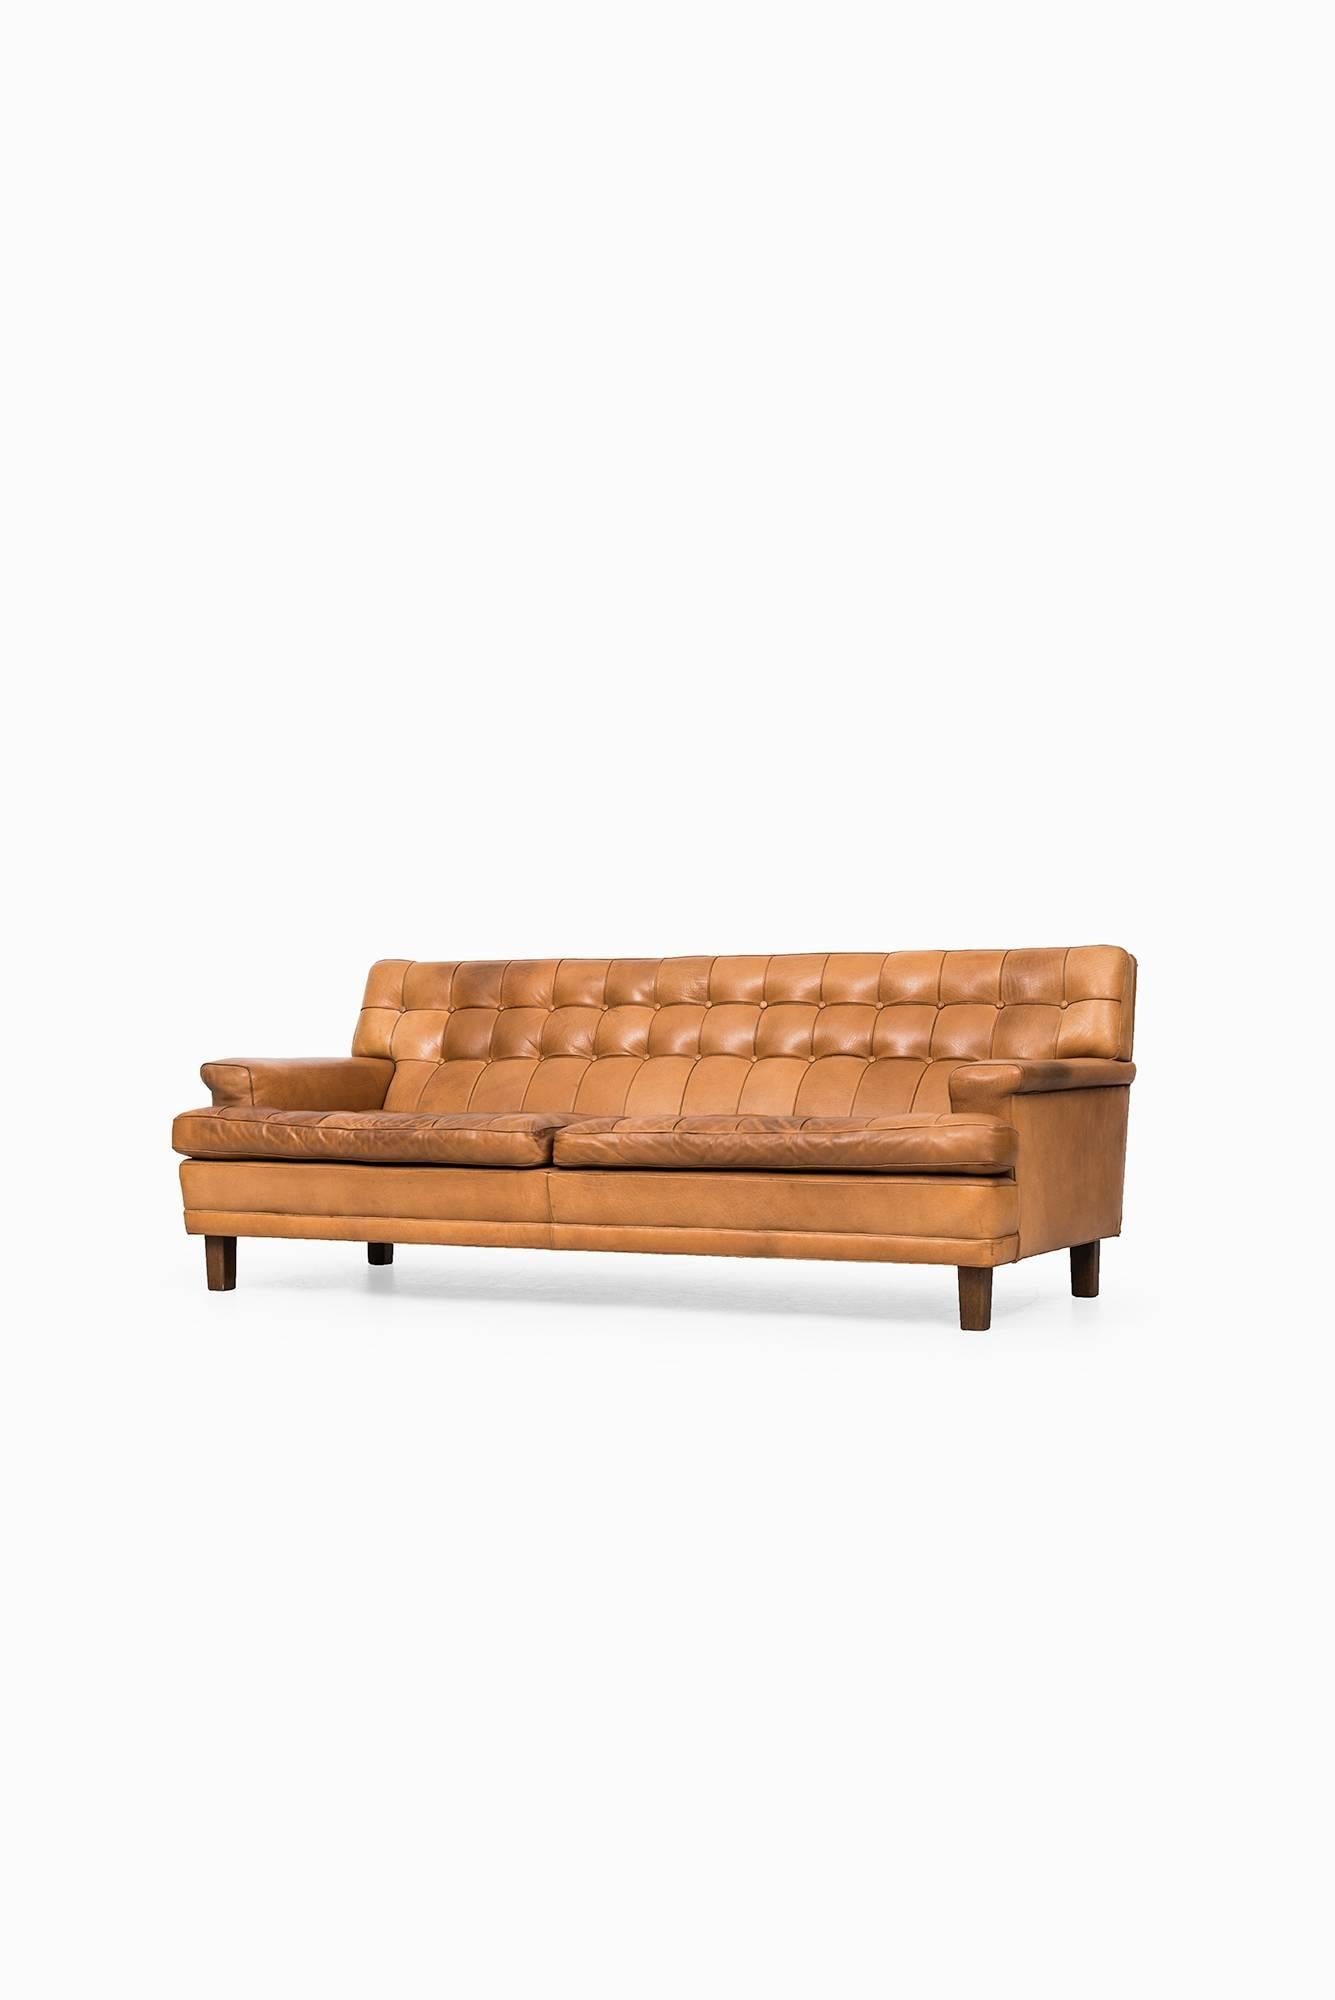 Arne Norell Merkur sofa in cognac brown leather by Norell AB in Sweden 1